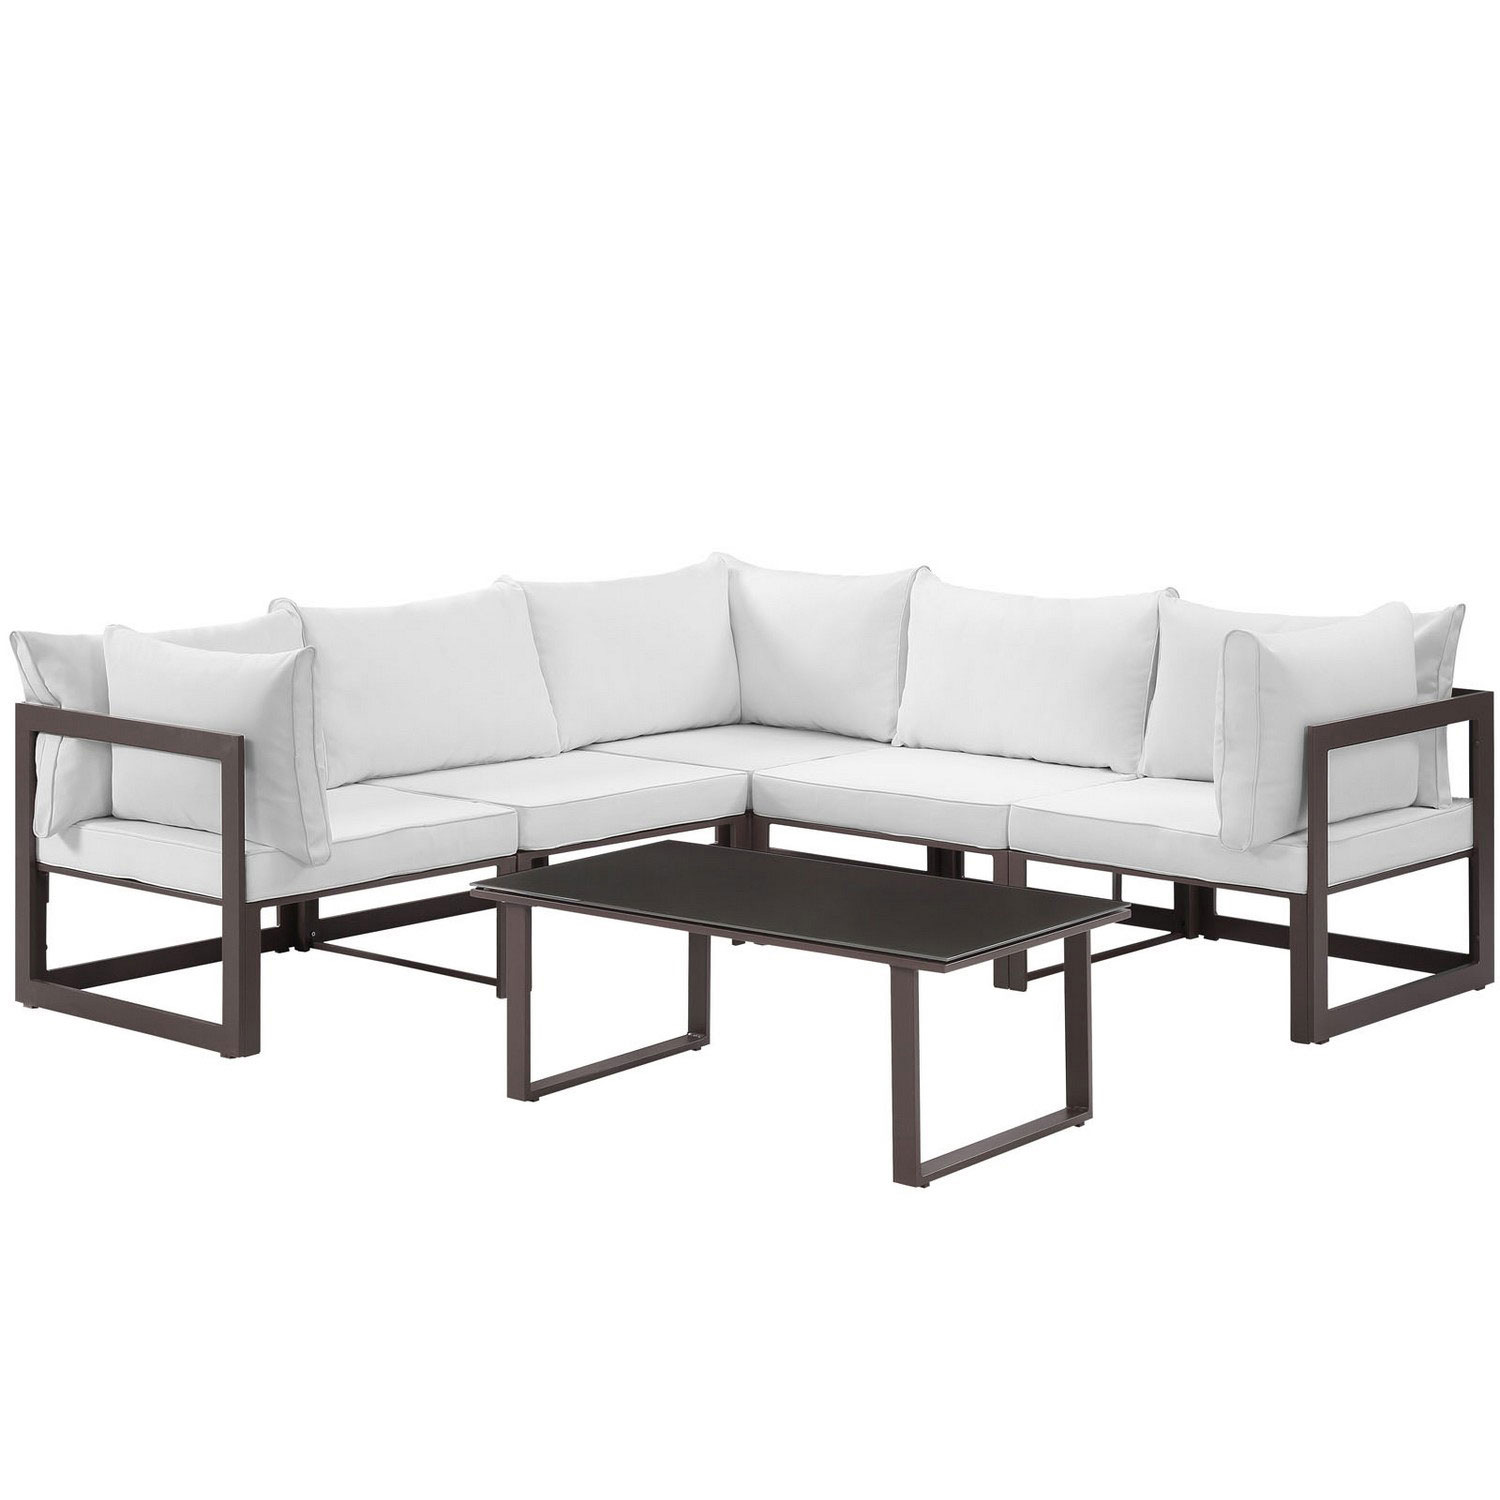 Modway Fortuna 6 Piece Outdoor Patio Sectional Sofa Set - Brown/White